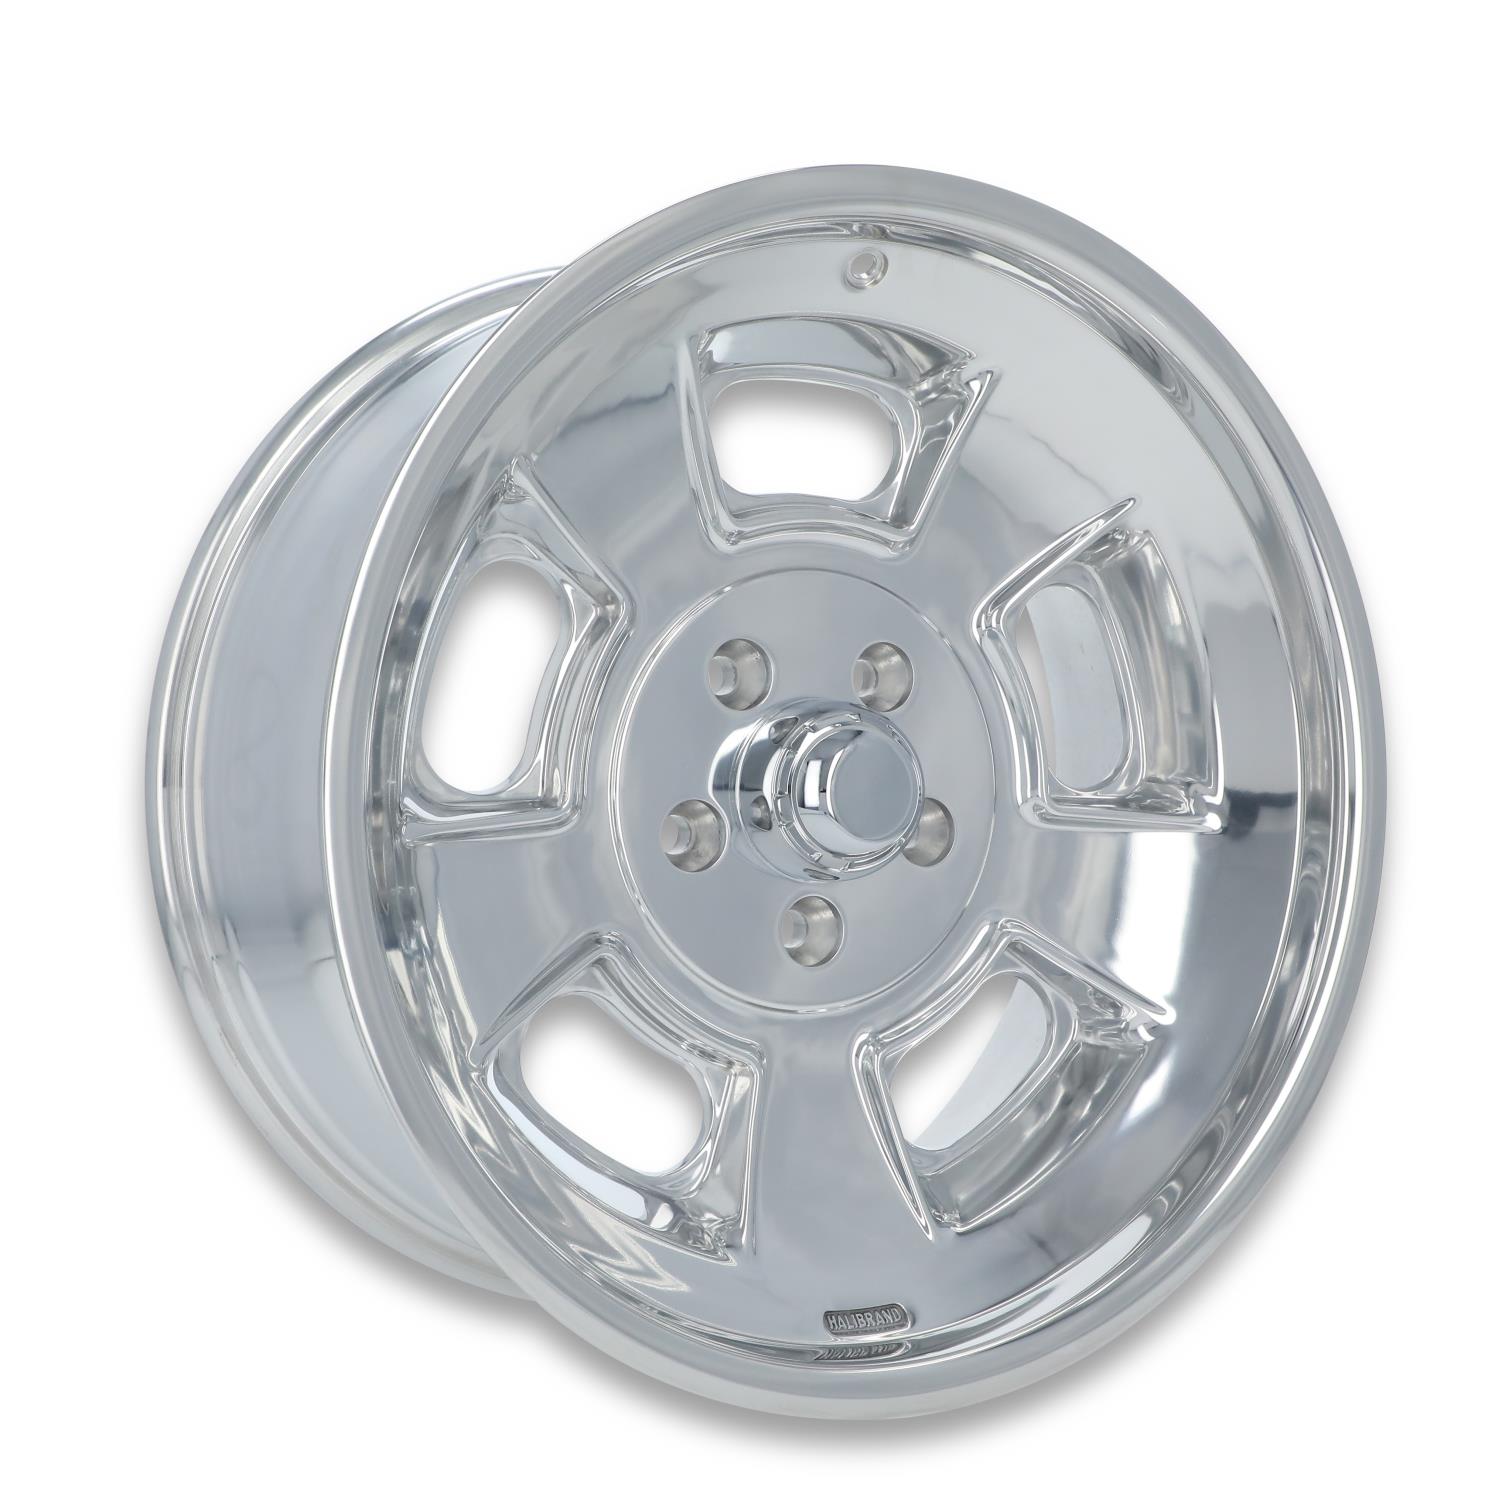 Sprint Front Wheel, Size: 19x8.5", Bolt Pattern: 5x5", Backspace: 4.75" [Polished - No Clearcoat]